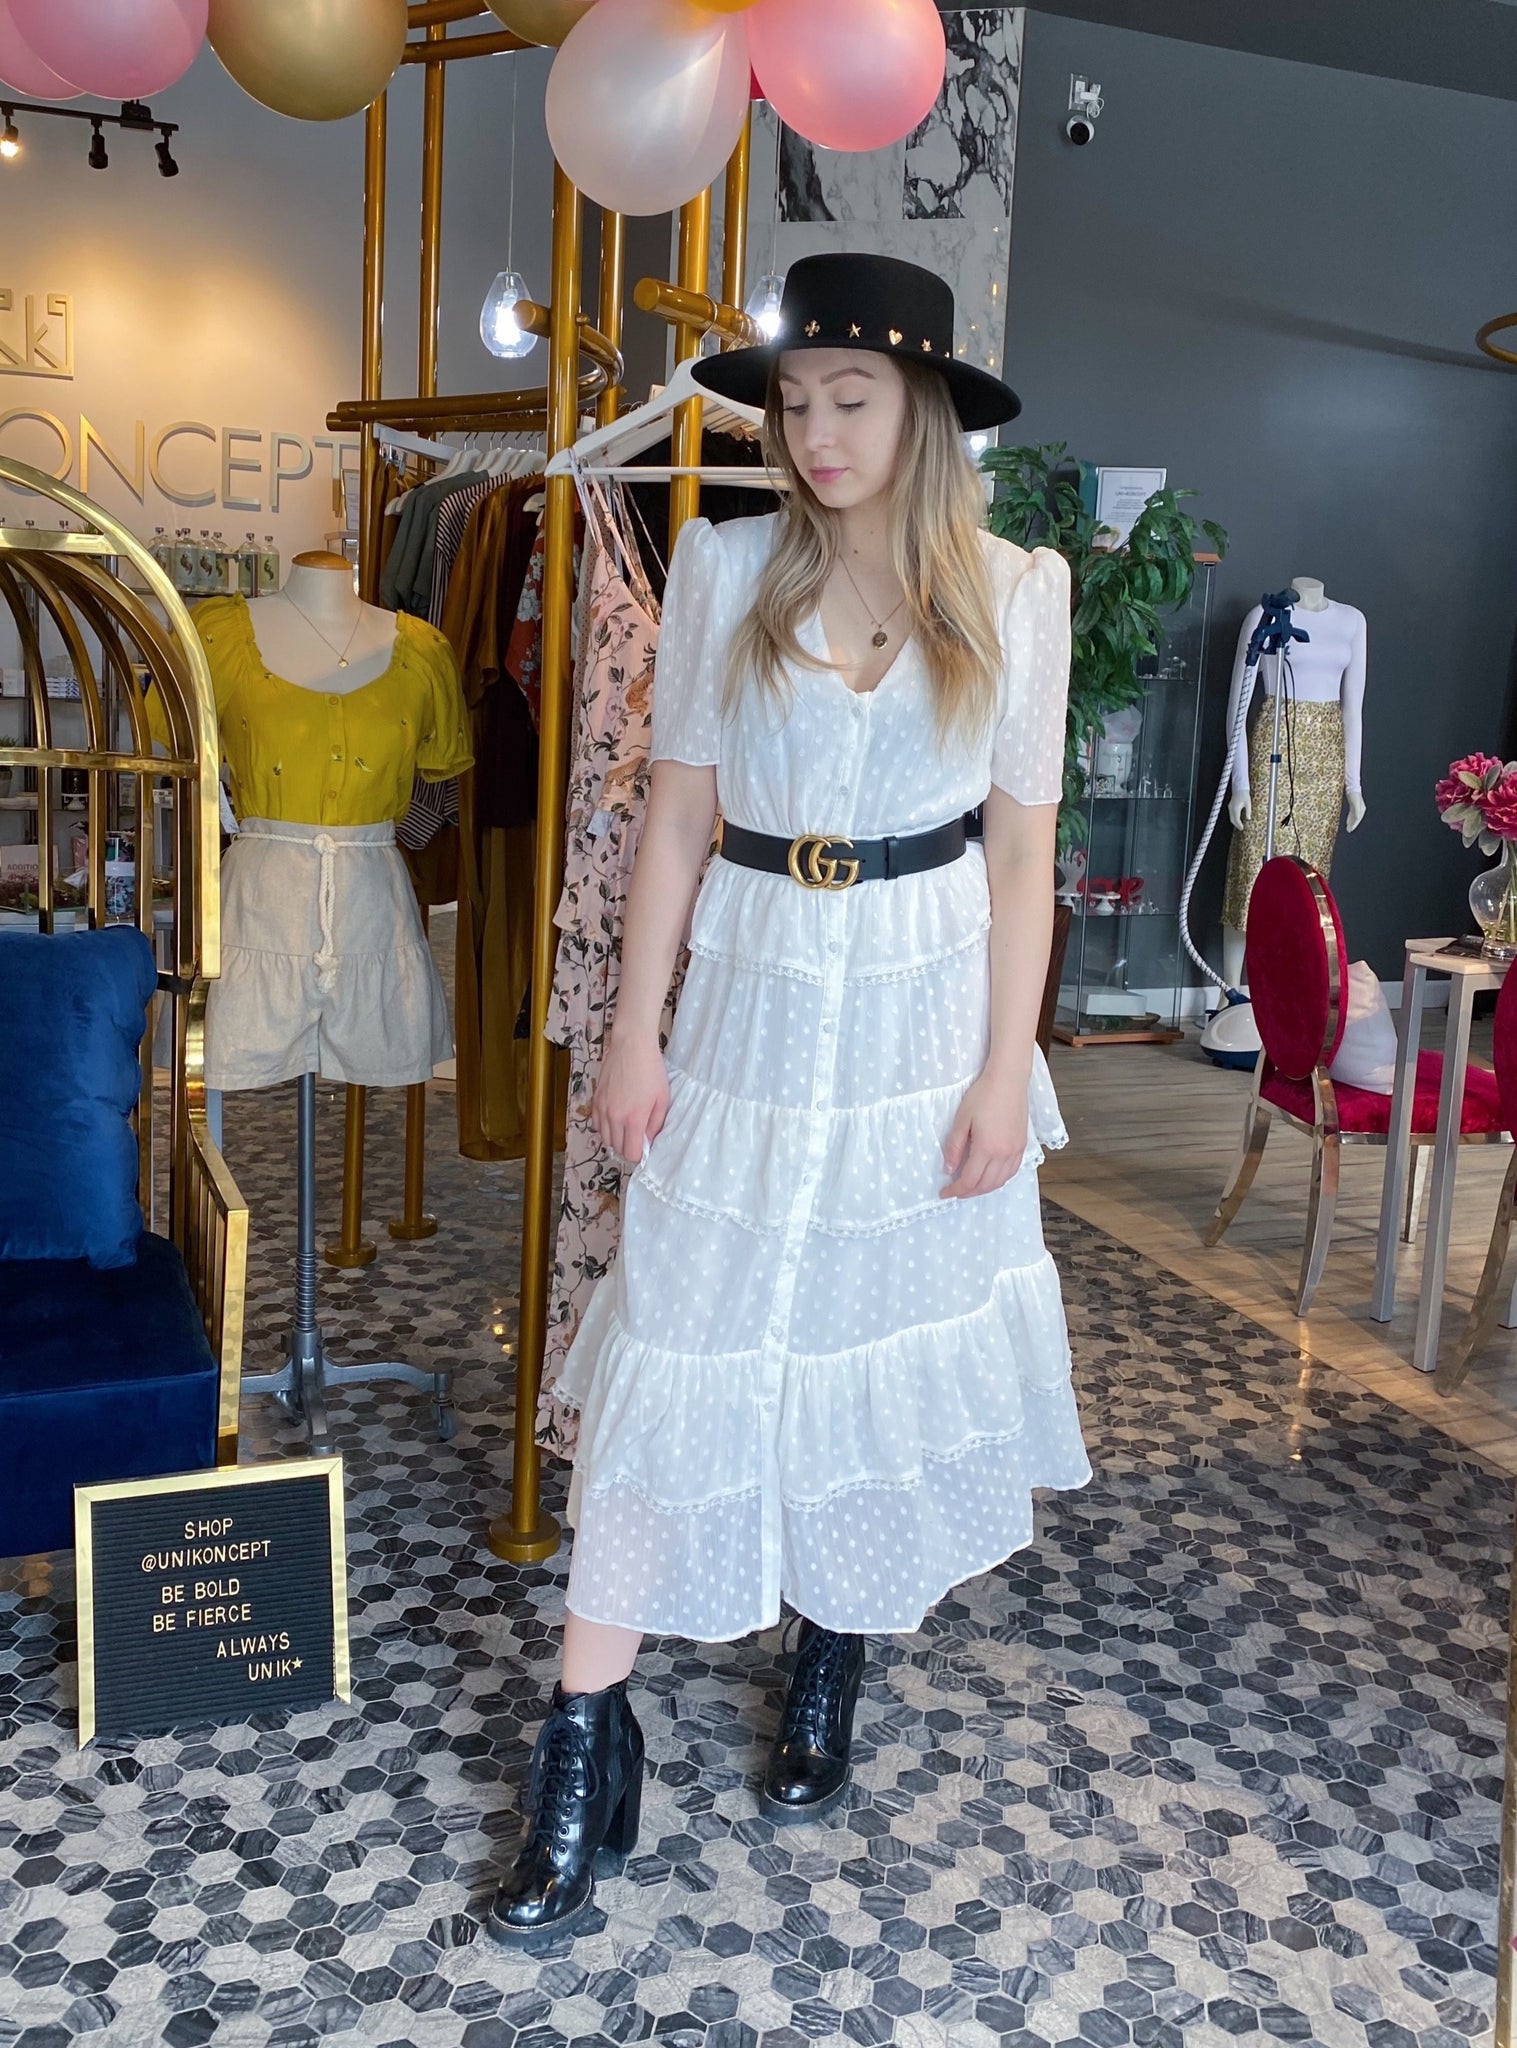 UNIKONCEPT Lifestyle boutique: The image shows the Hamptons White Dress by Free the Roses. This white, ankle length button down dress is extremely elegant with a v-neck and relaxed billowing short sleeves. The fabric is made with small white dots on the white base to add some dimension. The long skirt is tiered and ruffled with a lattice lace detailing as a trim on each layer. 